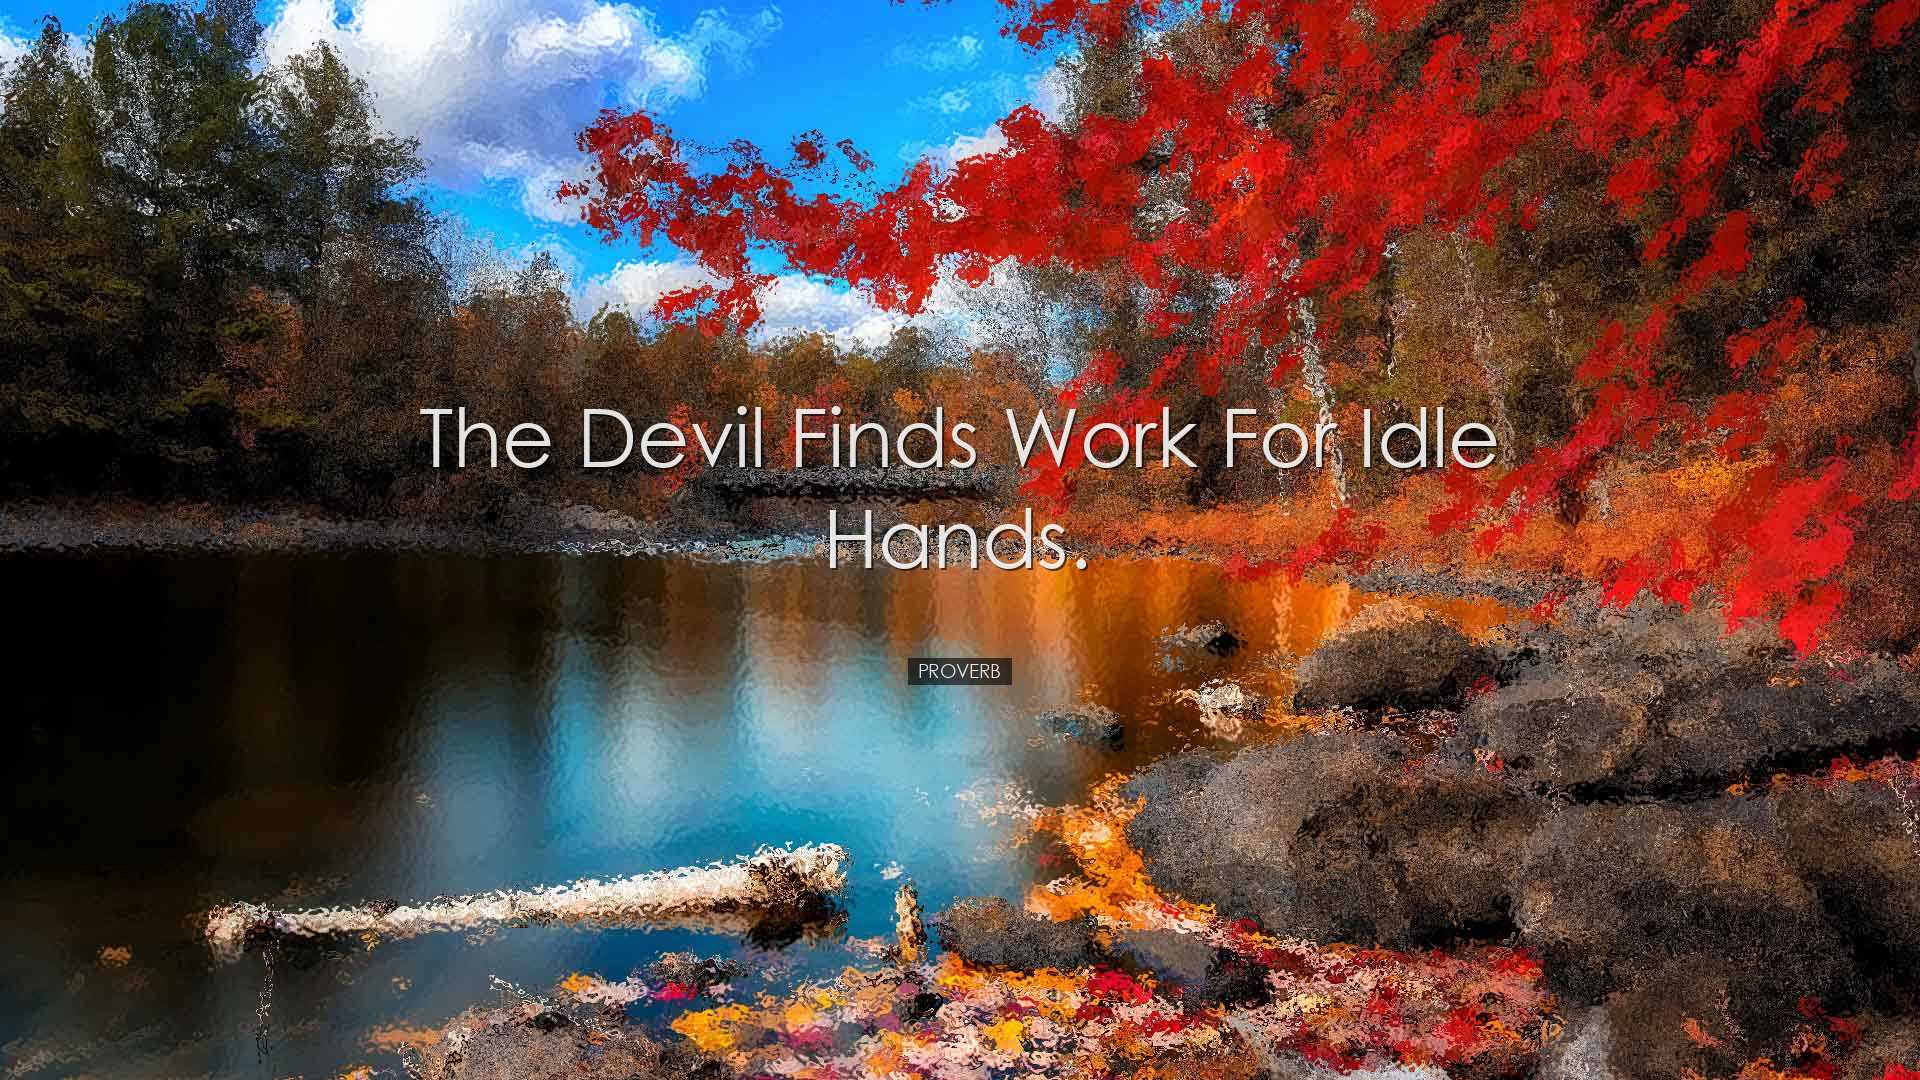 The Devil finds work for idle hands. - Proverb